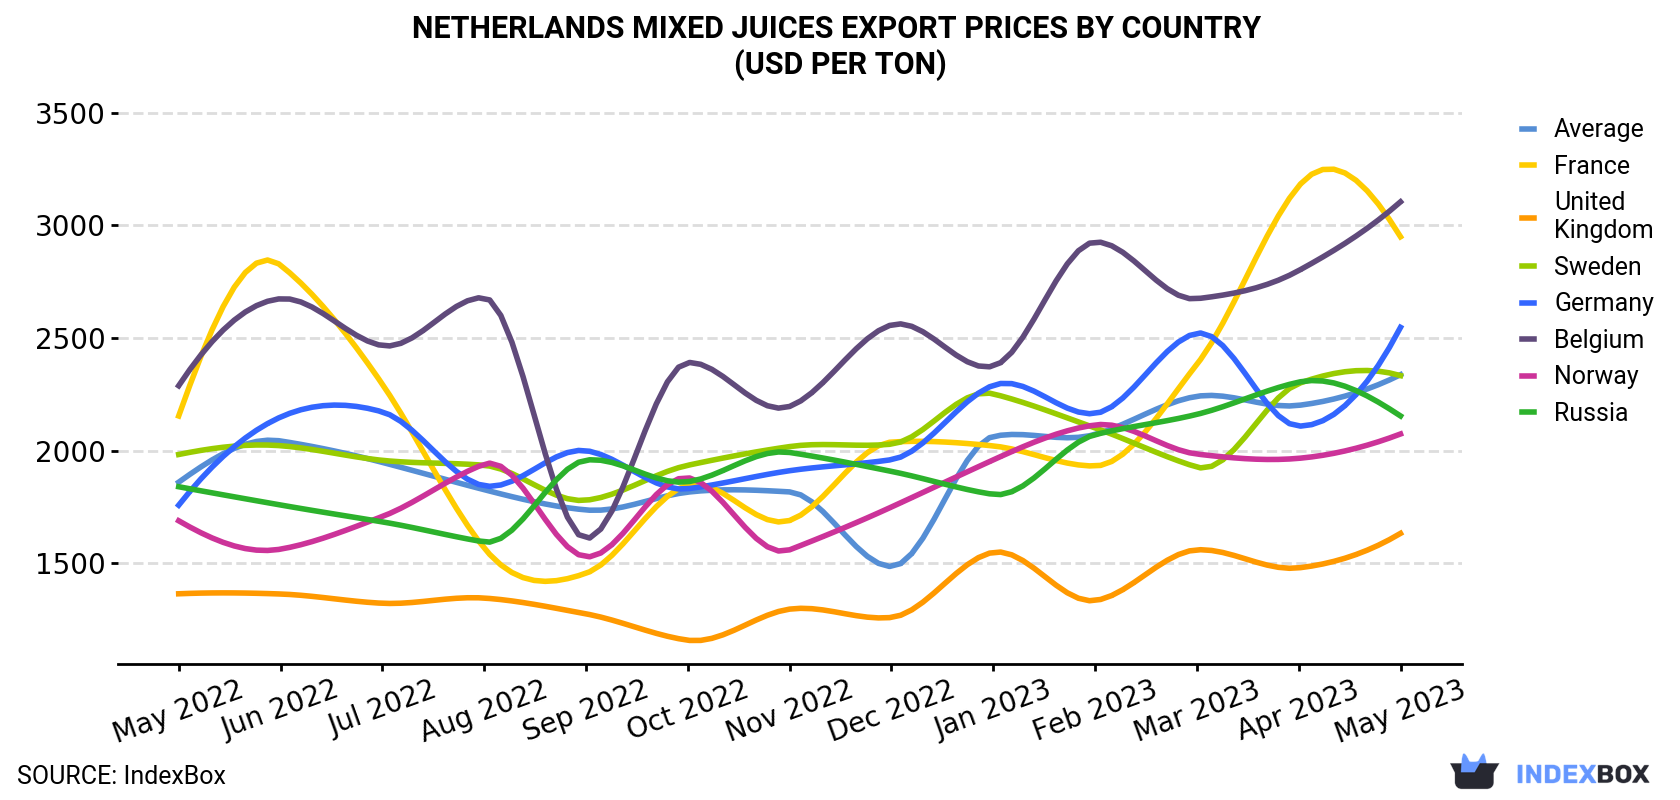 Netherlands Mixed Juices Export Prices By Country (USD Per Ton)